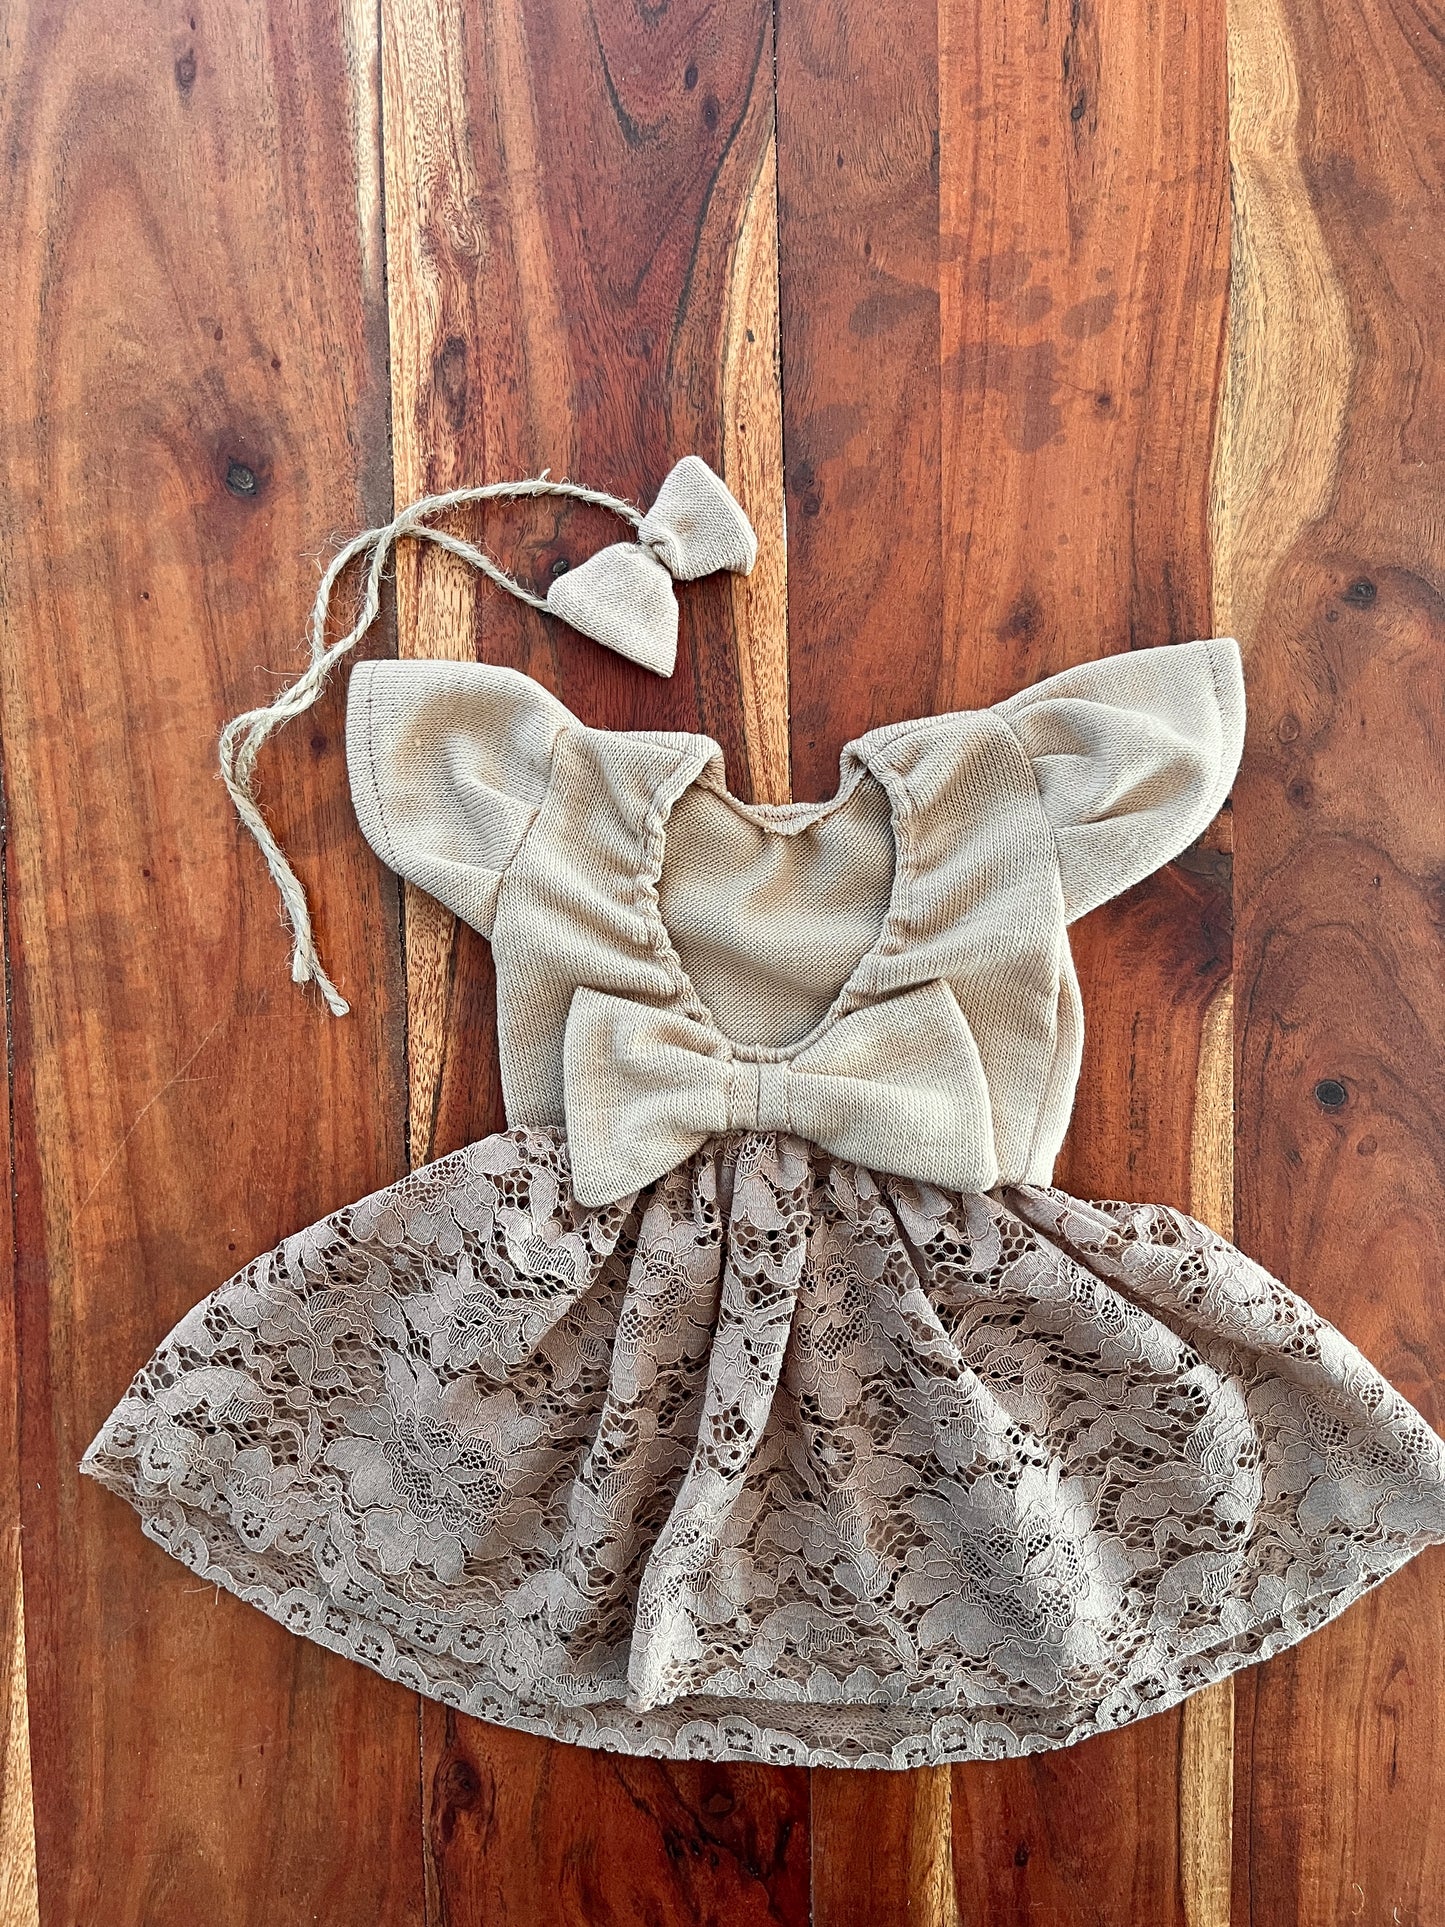 Boho7 dress with lace bottom perfect for newborn photoshoot.